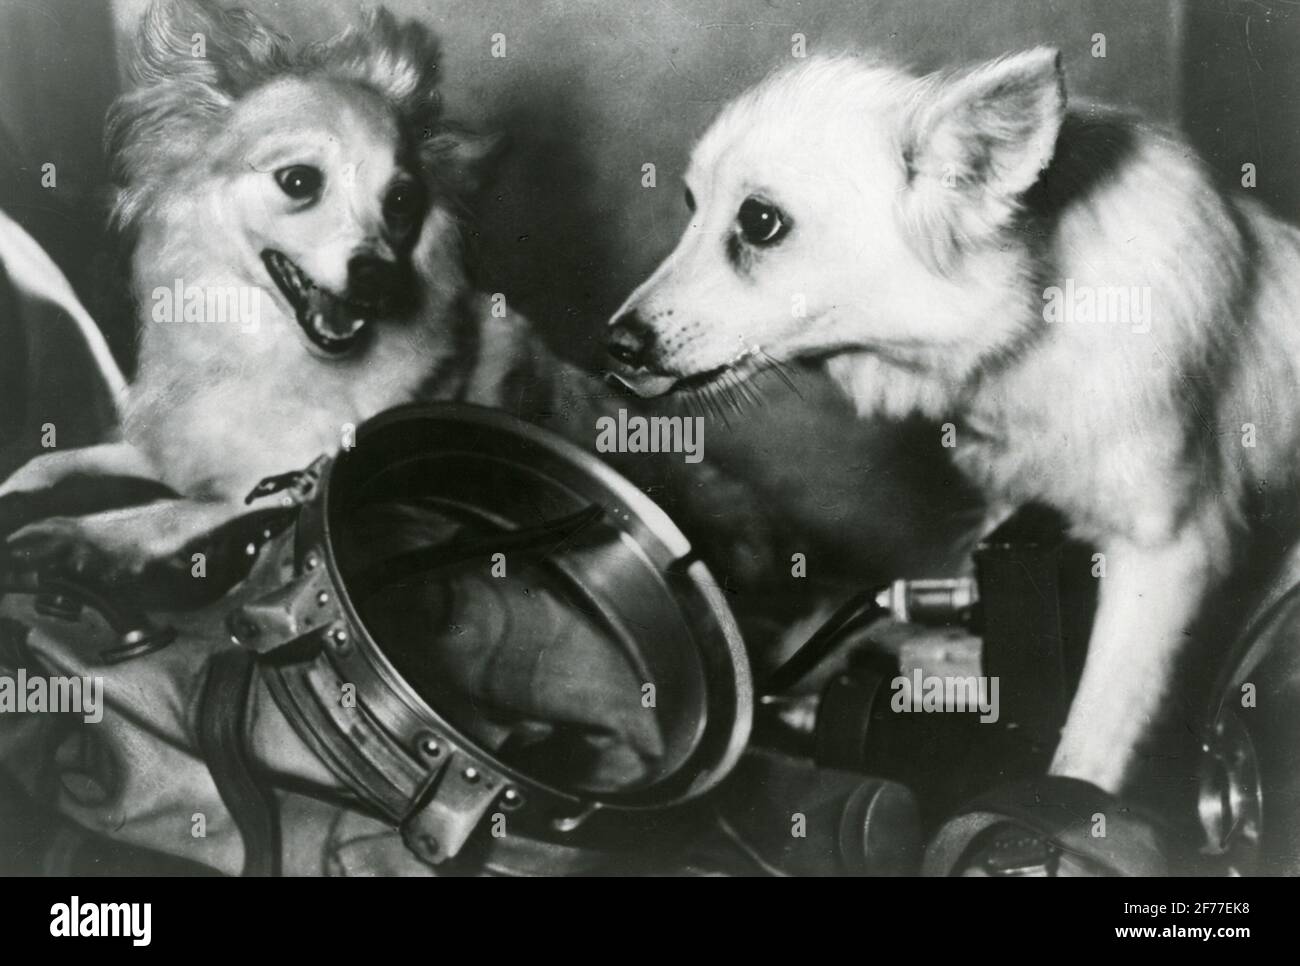 Space dogs in the Soviet Union. Unknown which dogs. Stock Photo